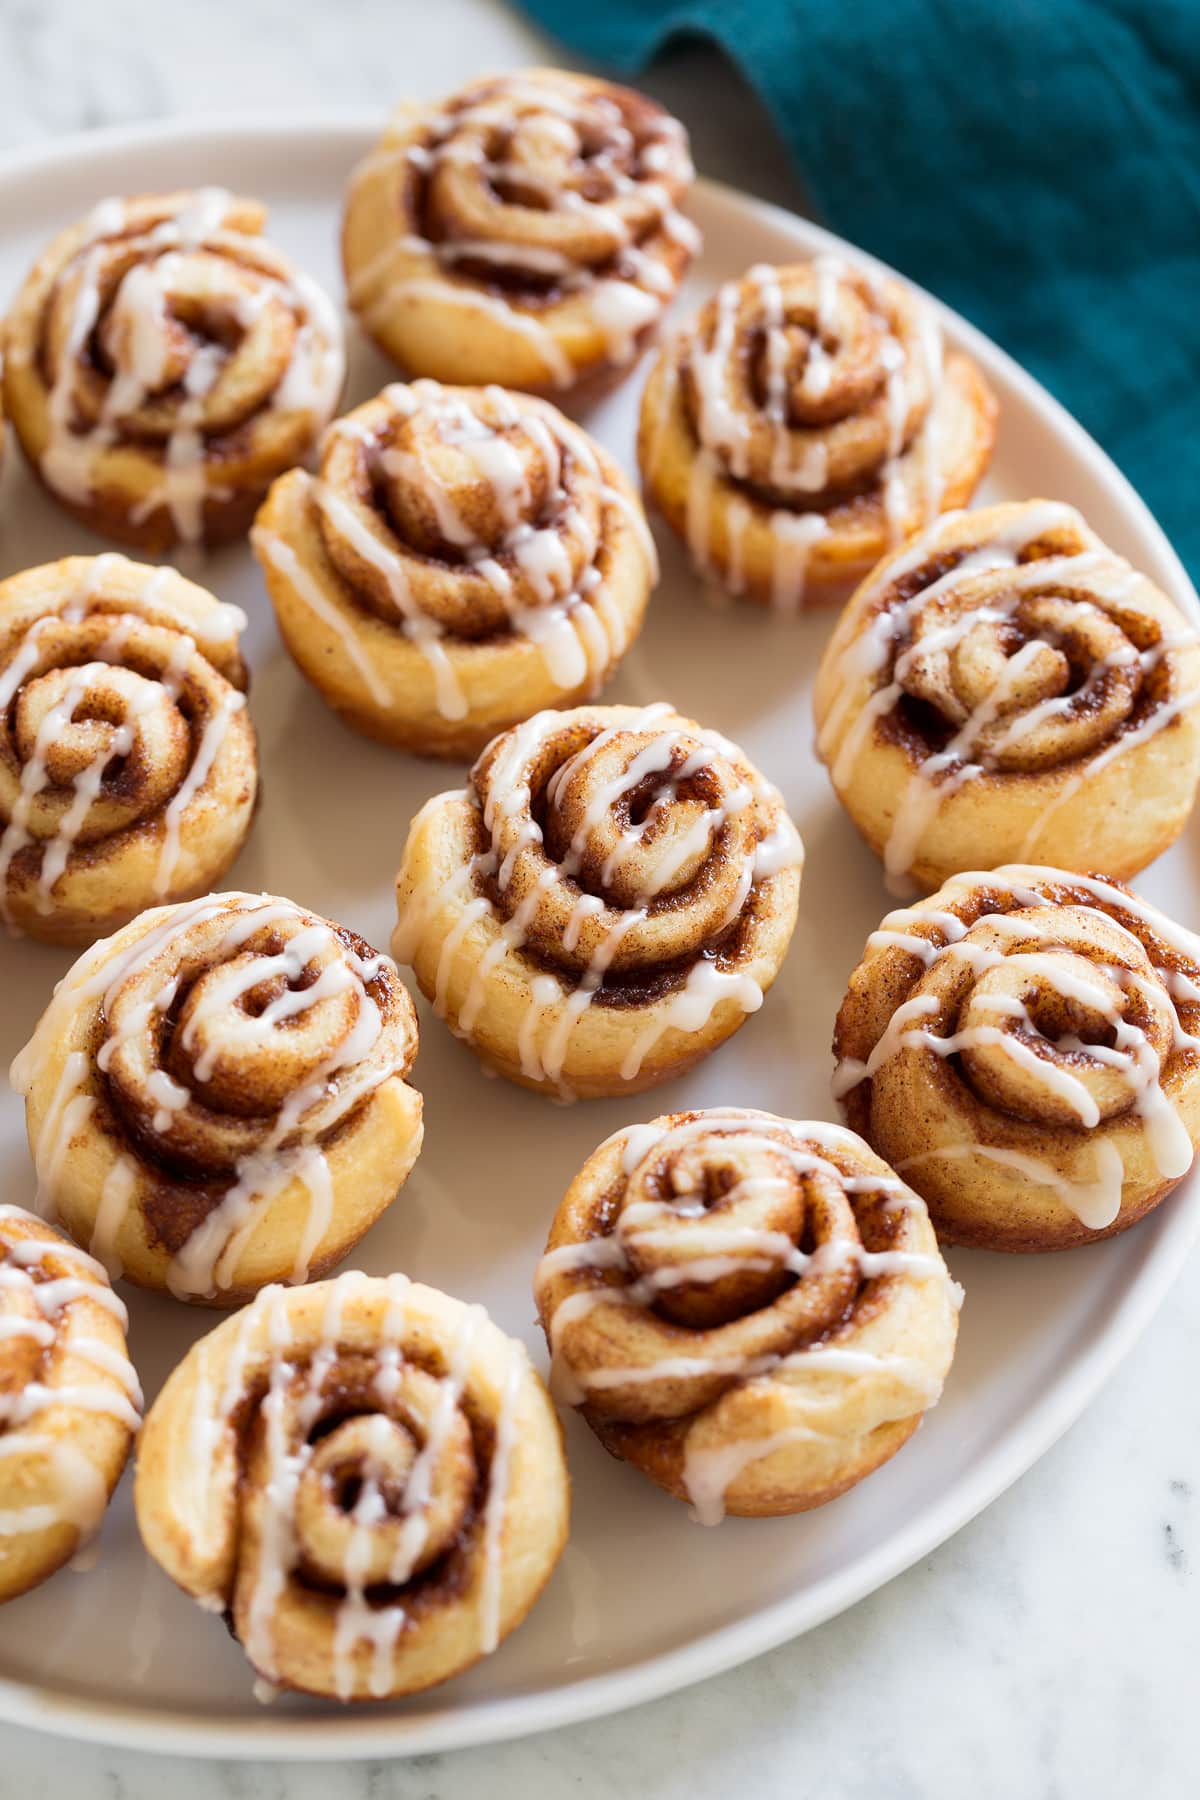 Photo of 12 Mini Cinnamon Rolls shown sitting on white platter over a marble surface.